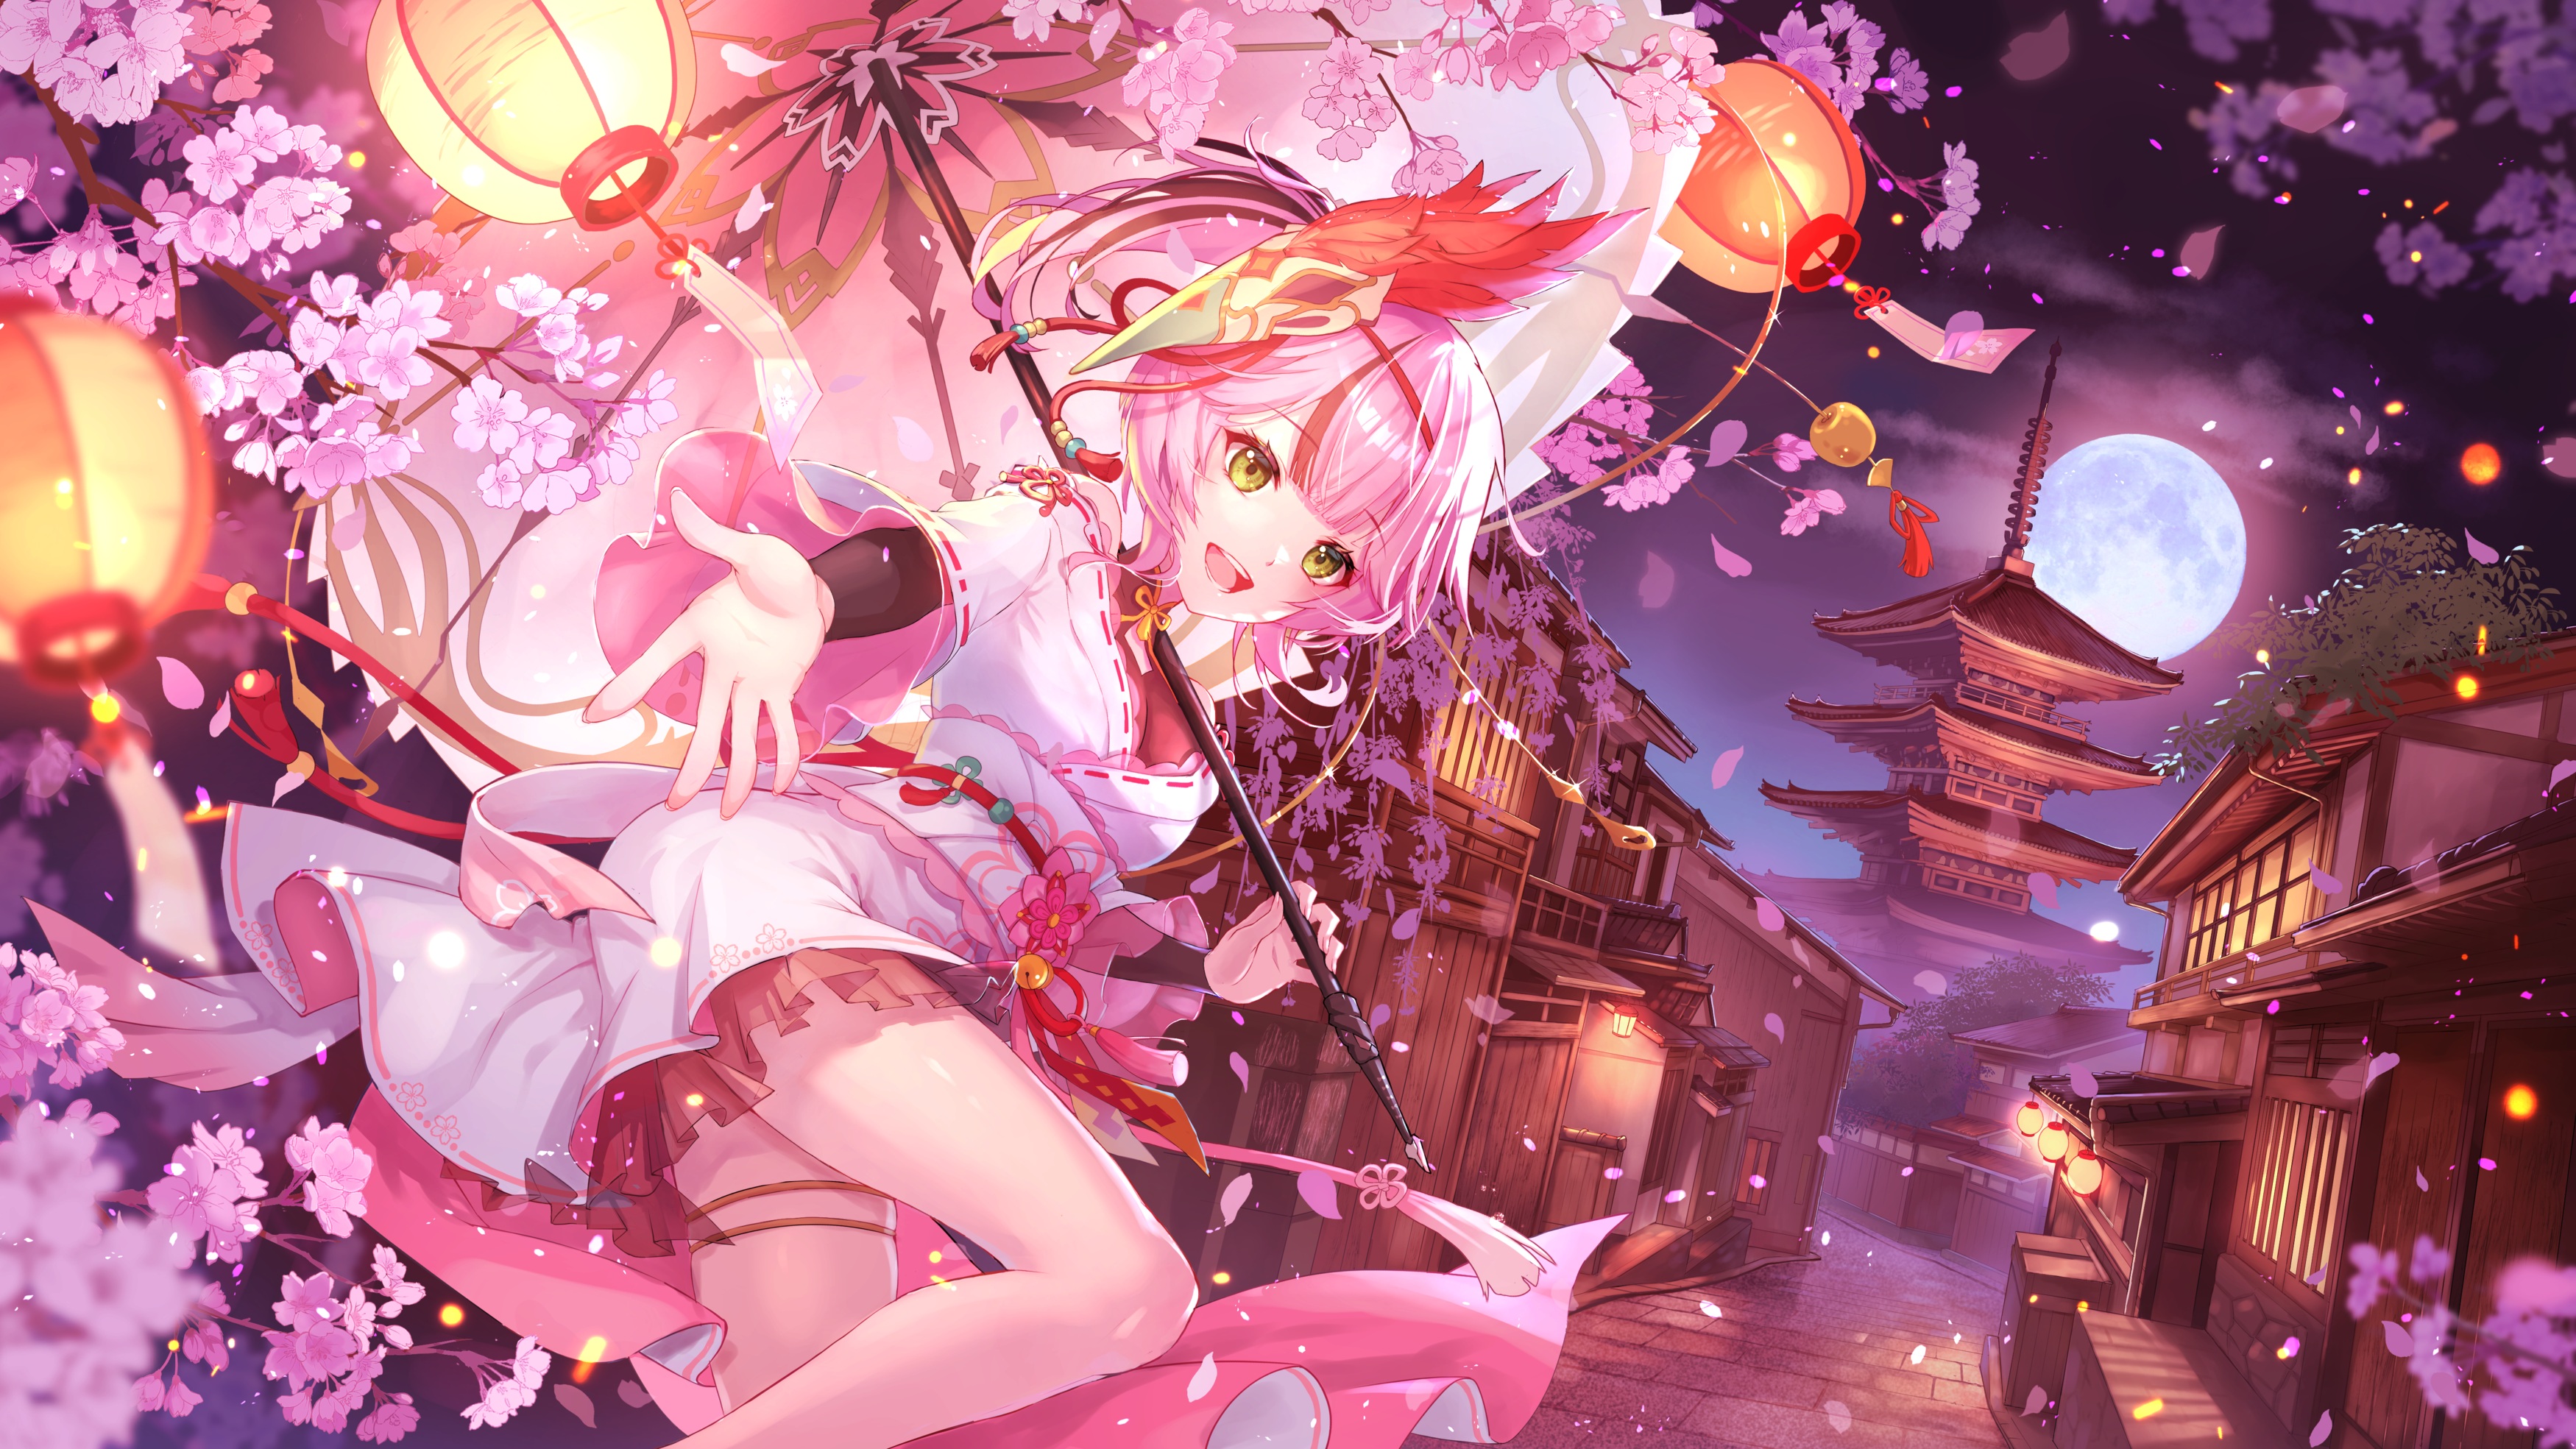 Anime 3500x1969 anime anime girls umbrella arms reaching petals leaves building Moon night sky lantern looking at viewer digital art pink hair open mouth green eyes flowers thighs legs